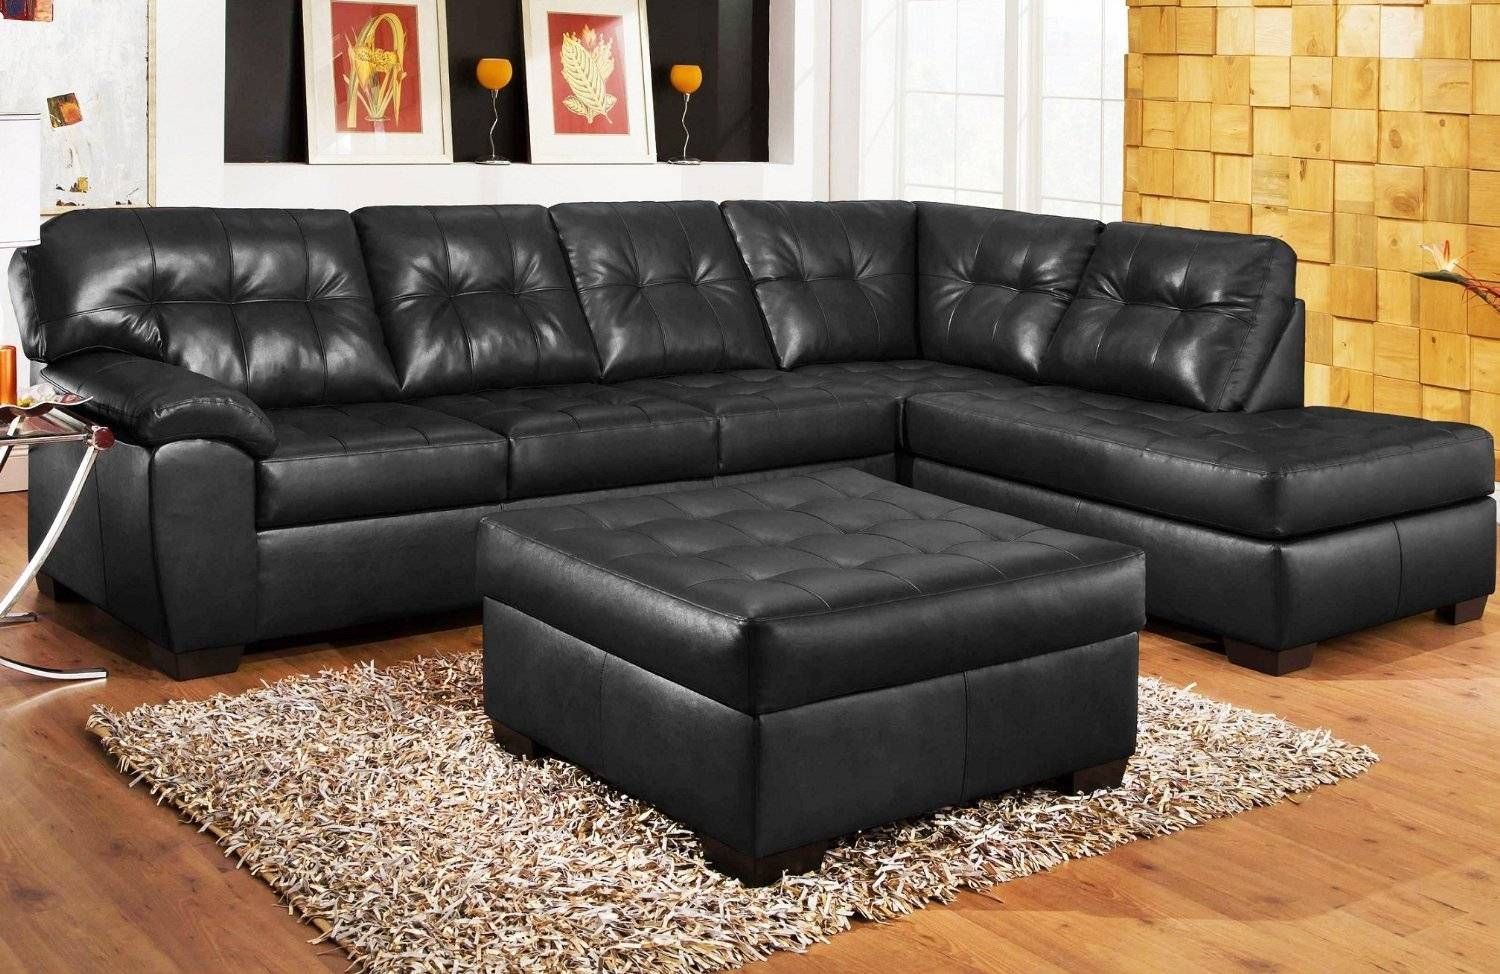 Black Leather Sectional Sofa | Roselawnlutheran For Black Leather Sectional Sleeper Sofas (Photo 1 of 30)